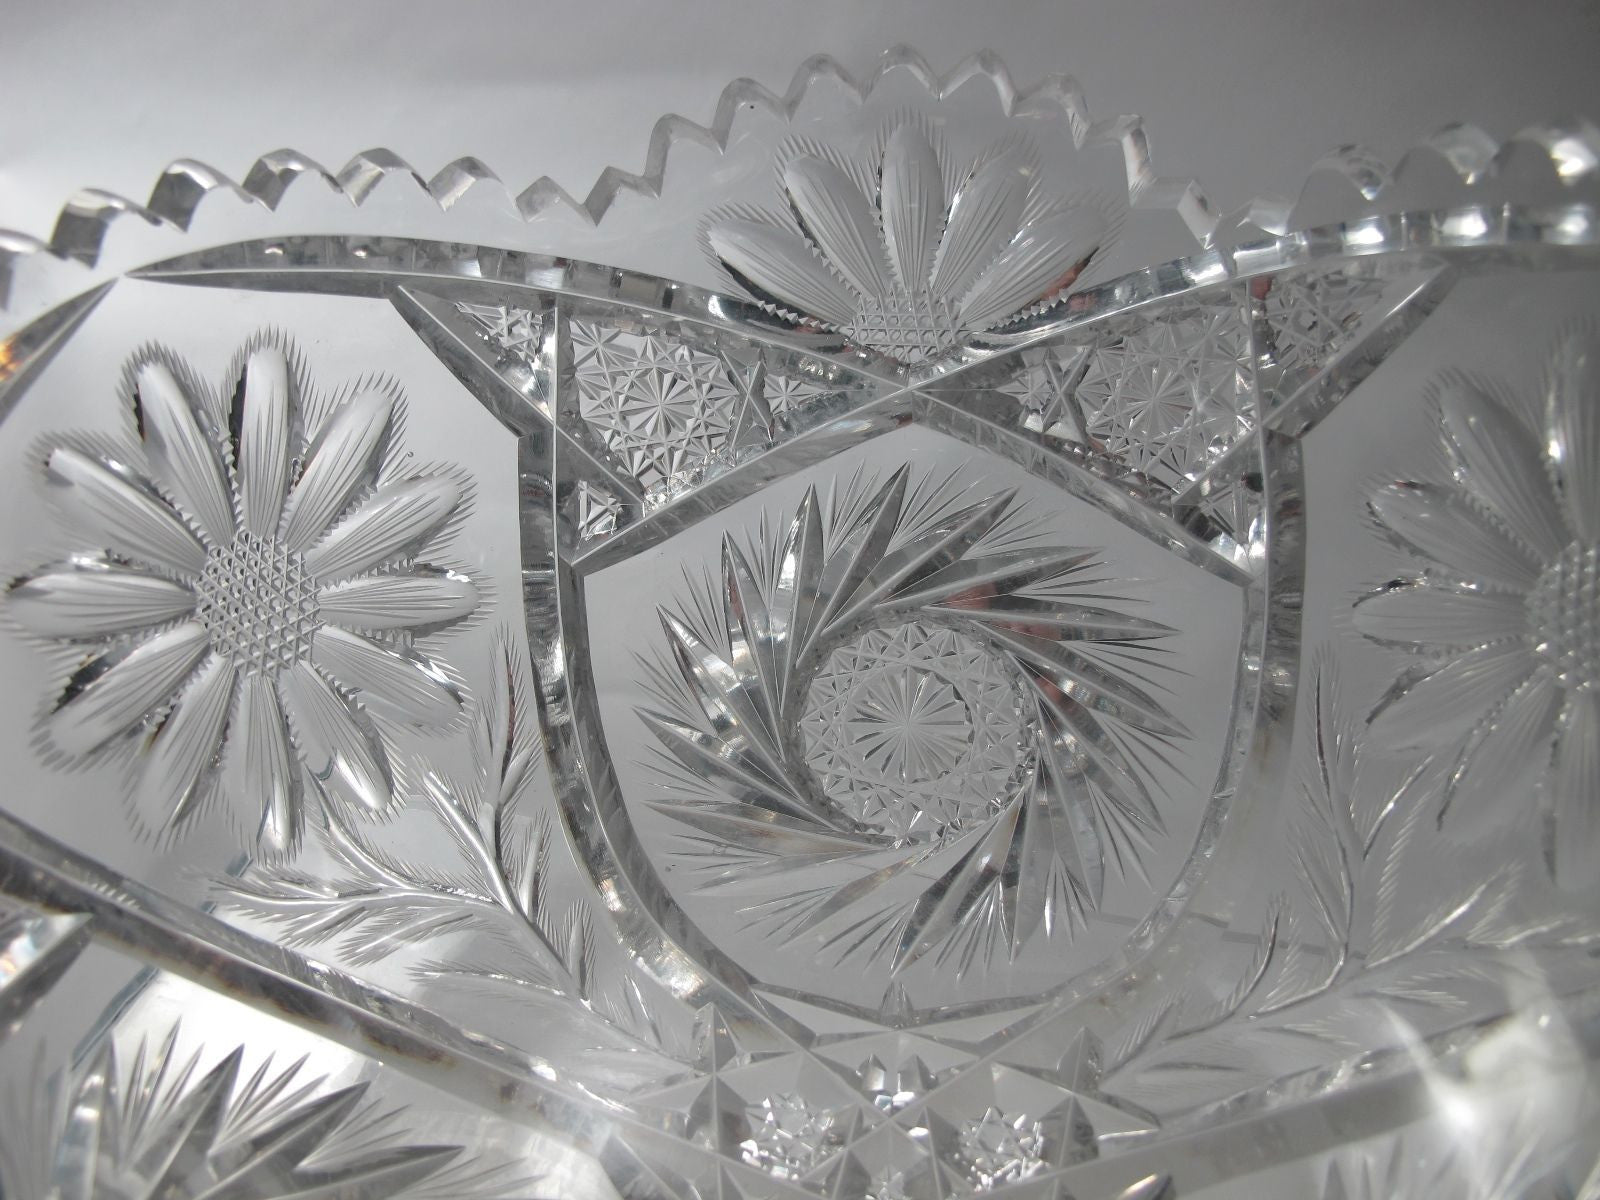 American Brilliant Period hand Cut Glass bowl ABP antique Anderson? - O'Rourke crystal awards & gifts abp cut glass